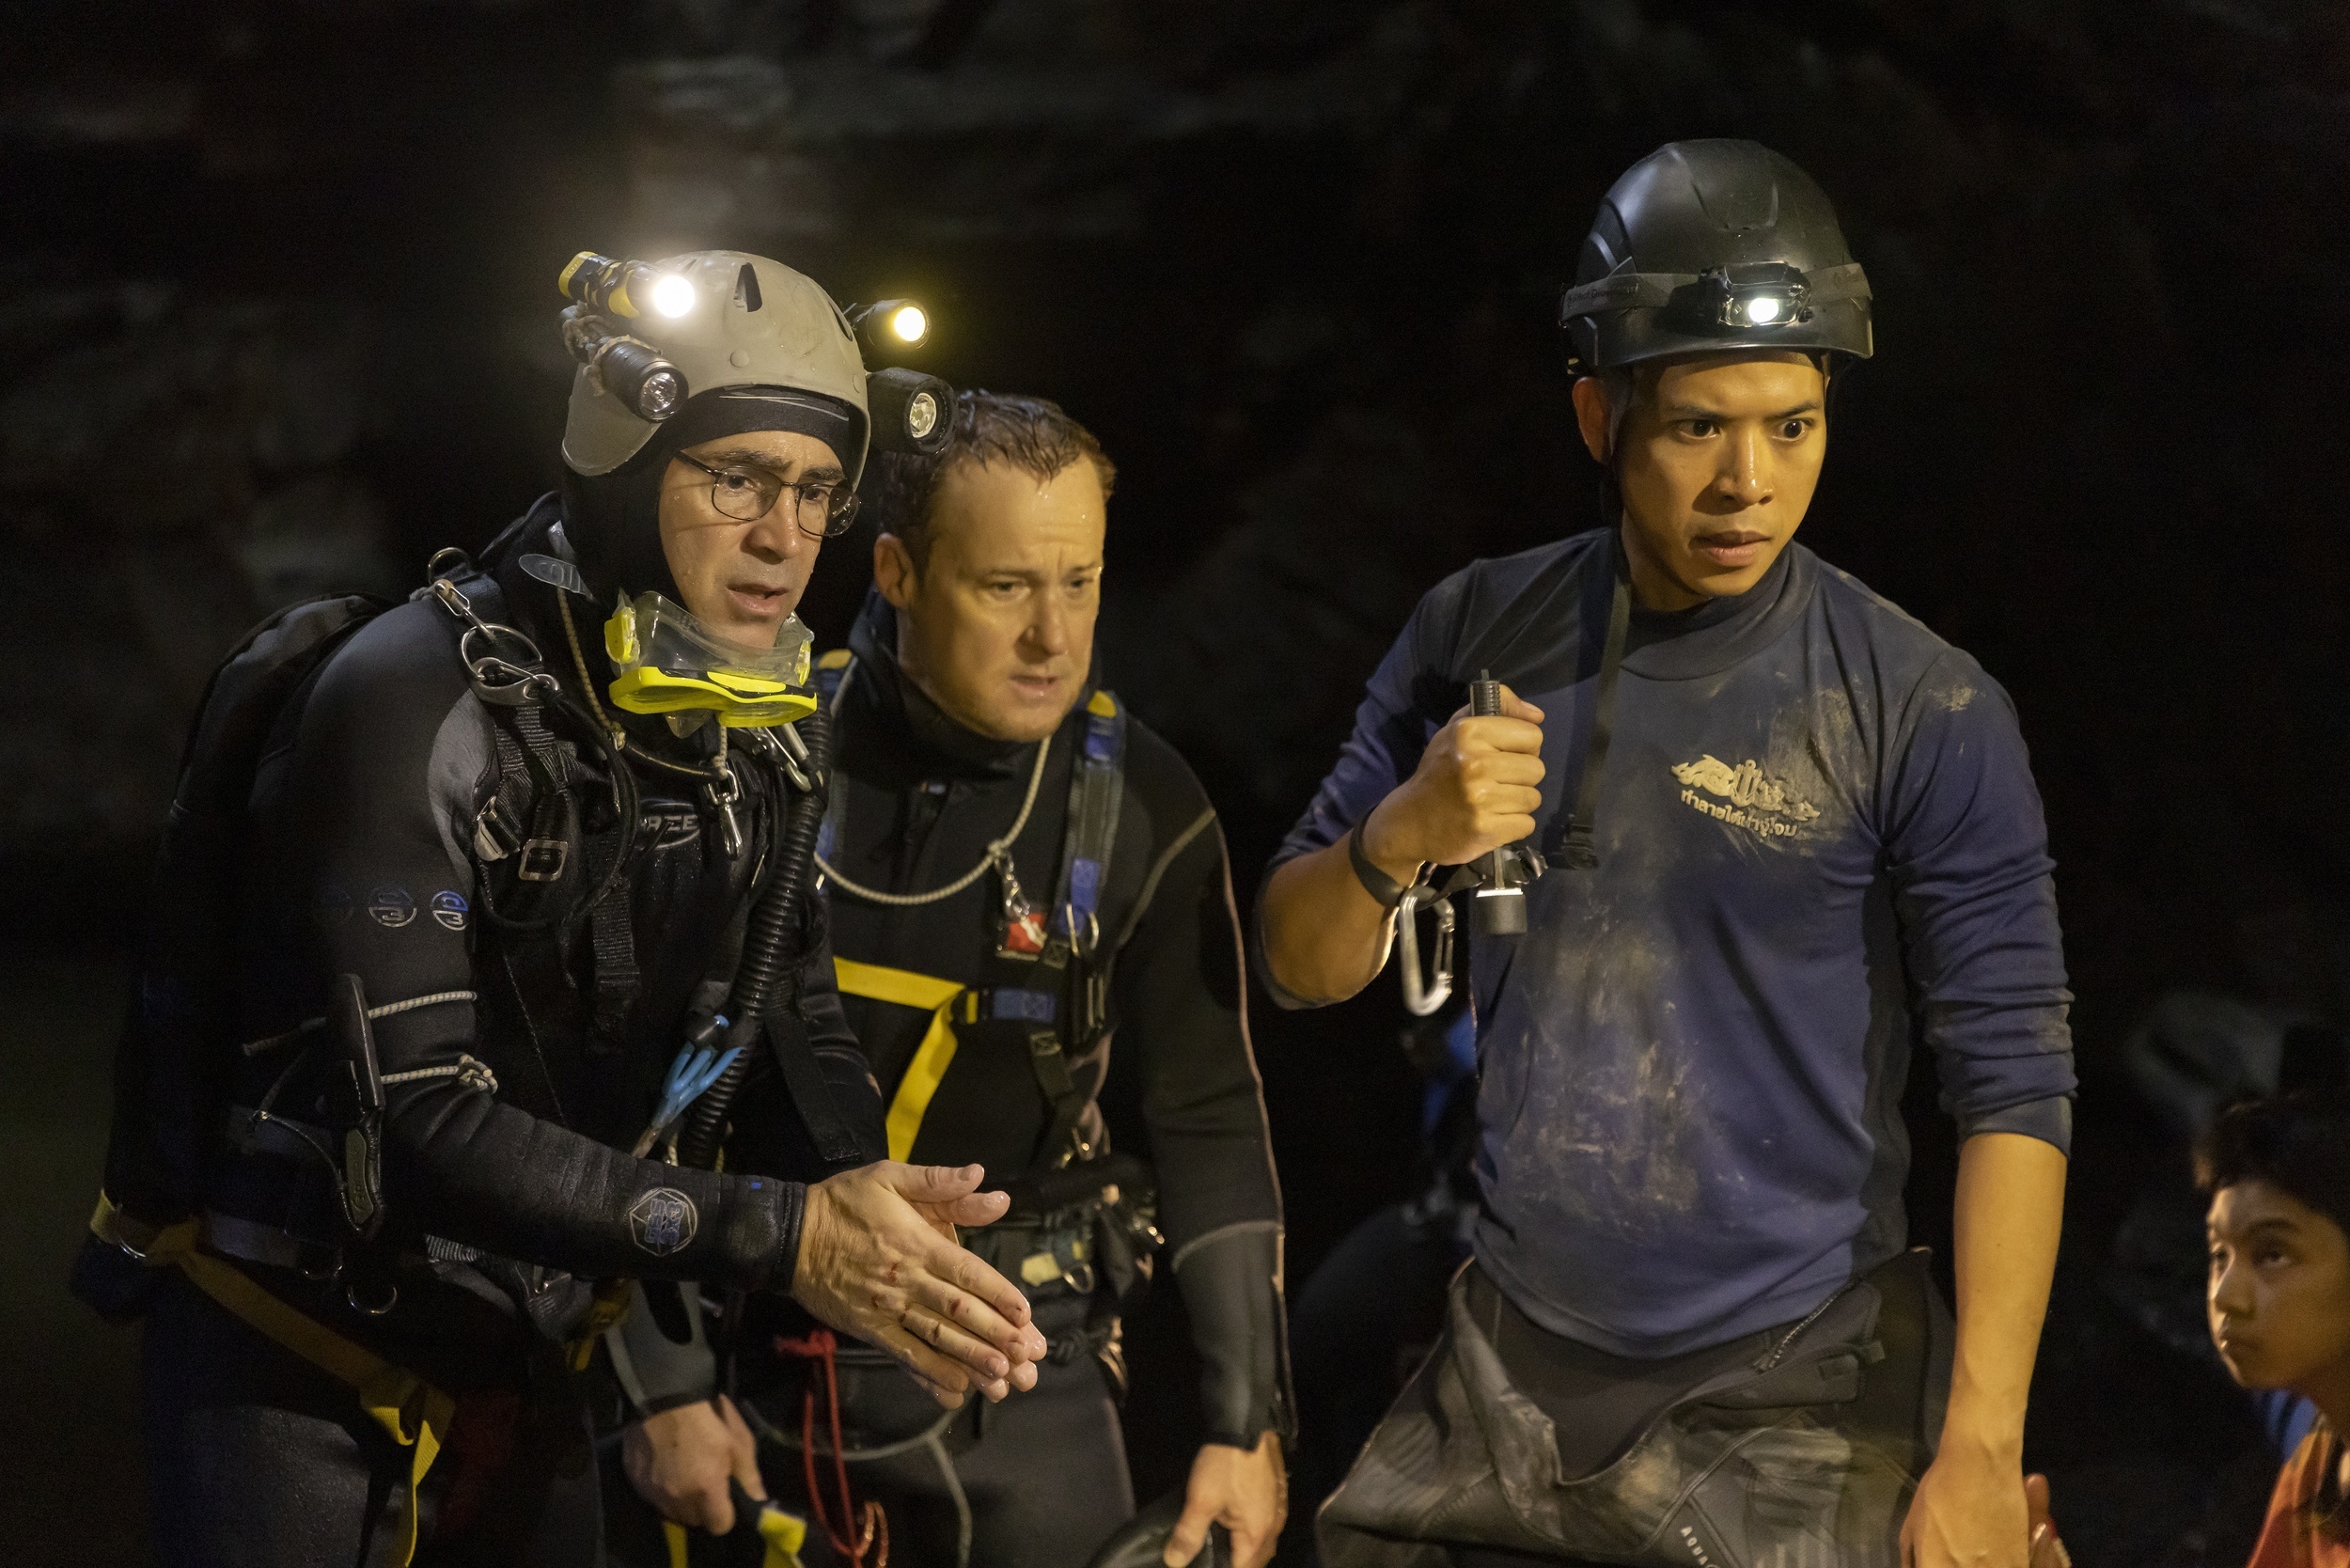 <p>You likely remember when the whole world was waiting to learn the fate of a team of young soccer players who were lost in a cave in Thailand in 2018, but you might not know that the story inspired a feature film. Relive all the panic and worry you felt in 2018 with 2022’s <em>Thirteen Lives</em>. </p><p>You may also like: <a href='https://www.yardbarker.com/entertainment/articles/20_pre_2000s_movies_that_would_not_get_made_today_032024/s1__39226218'>20 pre-2000s movies that would not get made today</a></p>